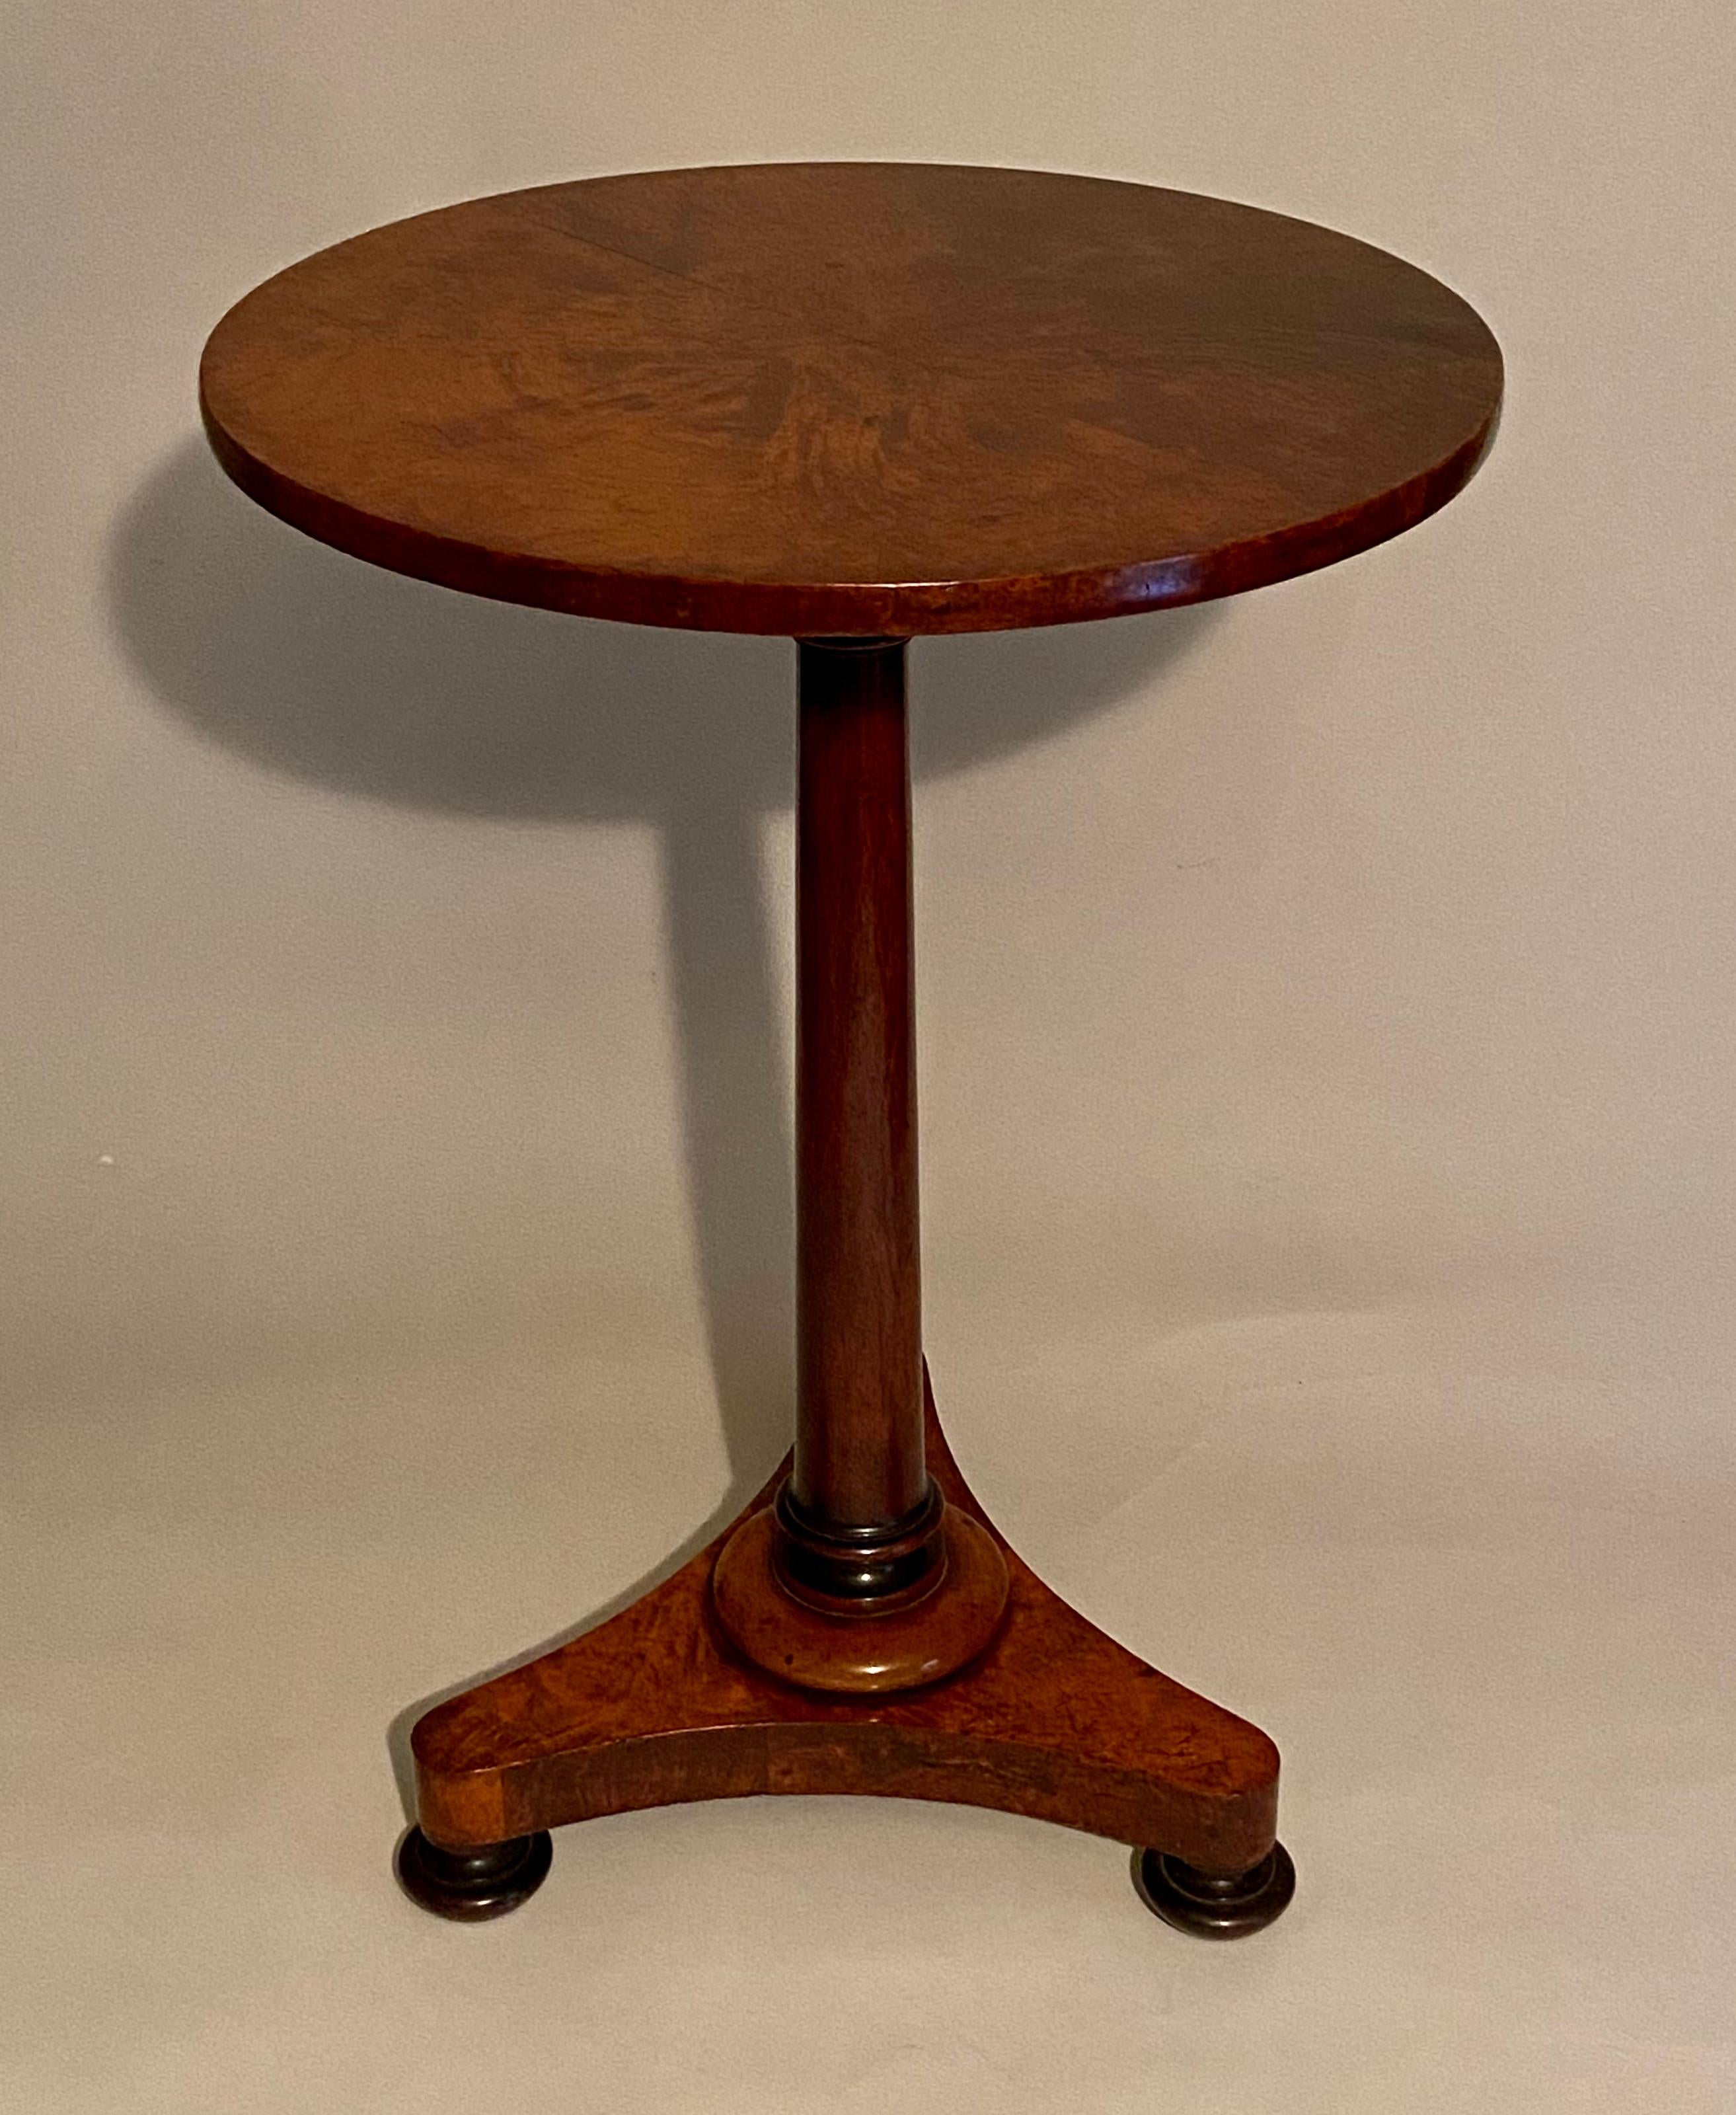 Regency Amboyna and Padouk wine table with circular top and tri-form base.